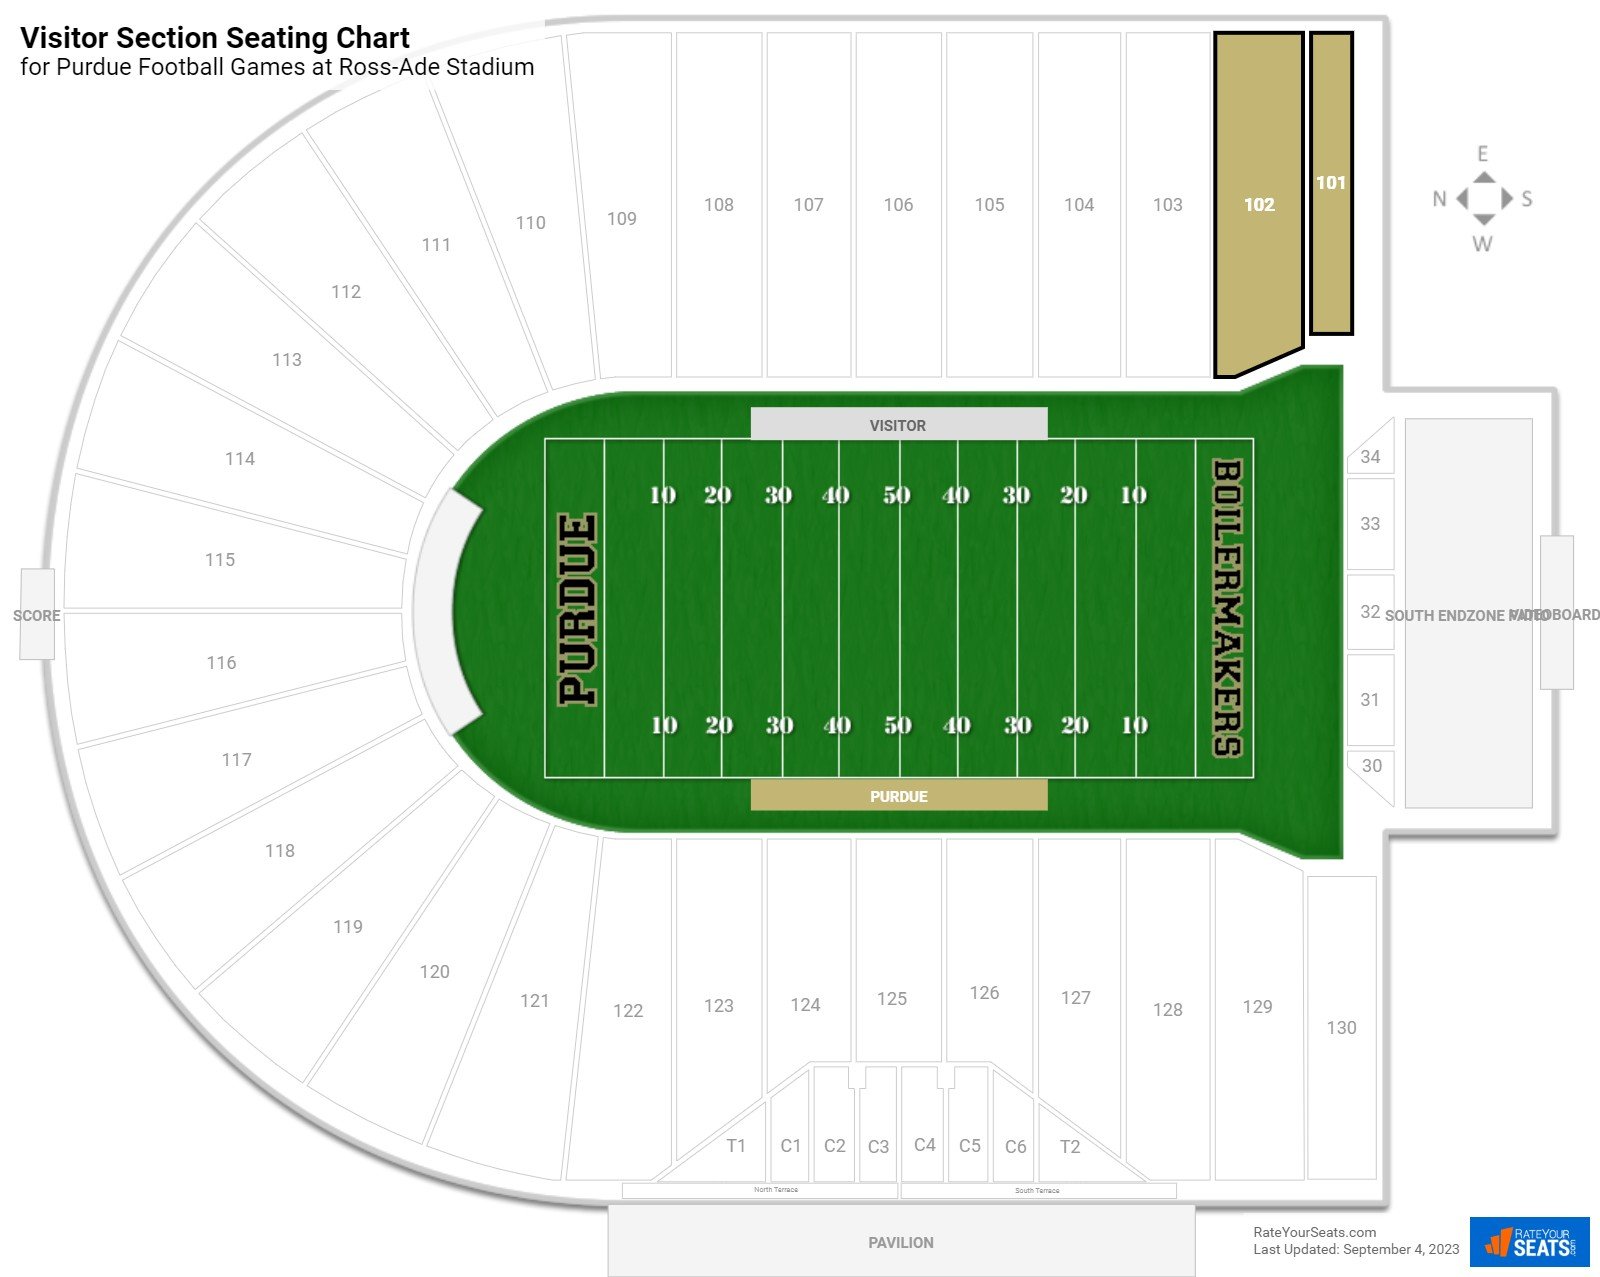 Purdue Visitor Section Seating Chart at Ross-Ade Stadium